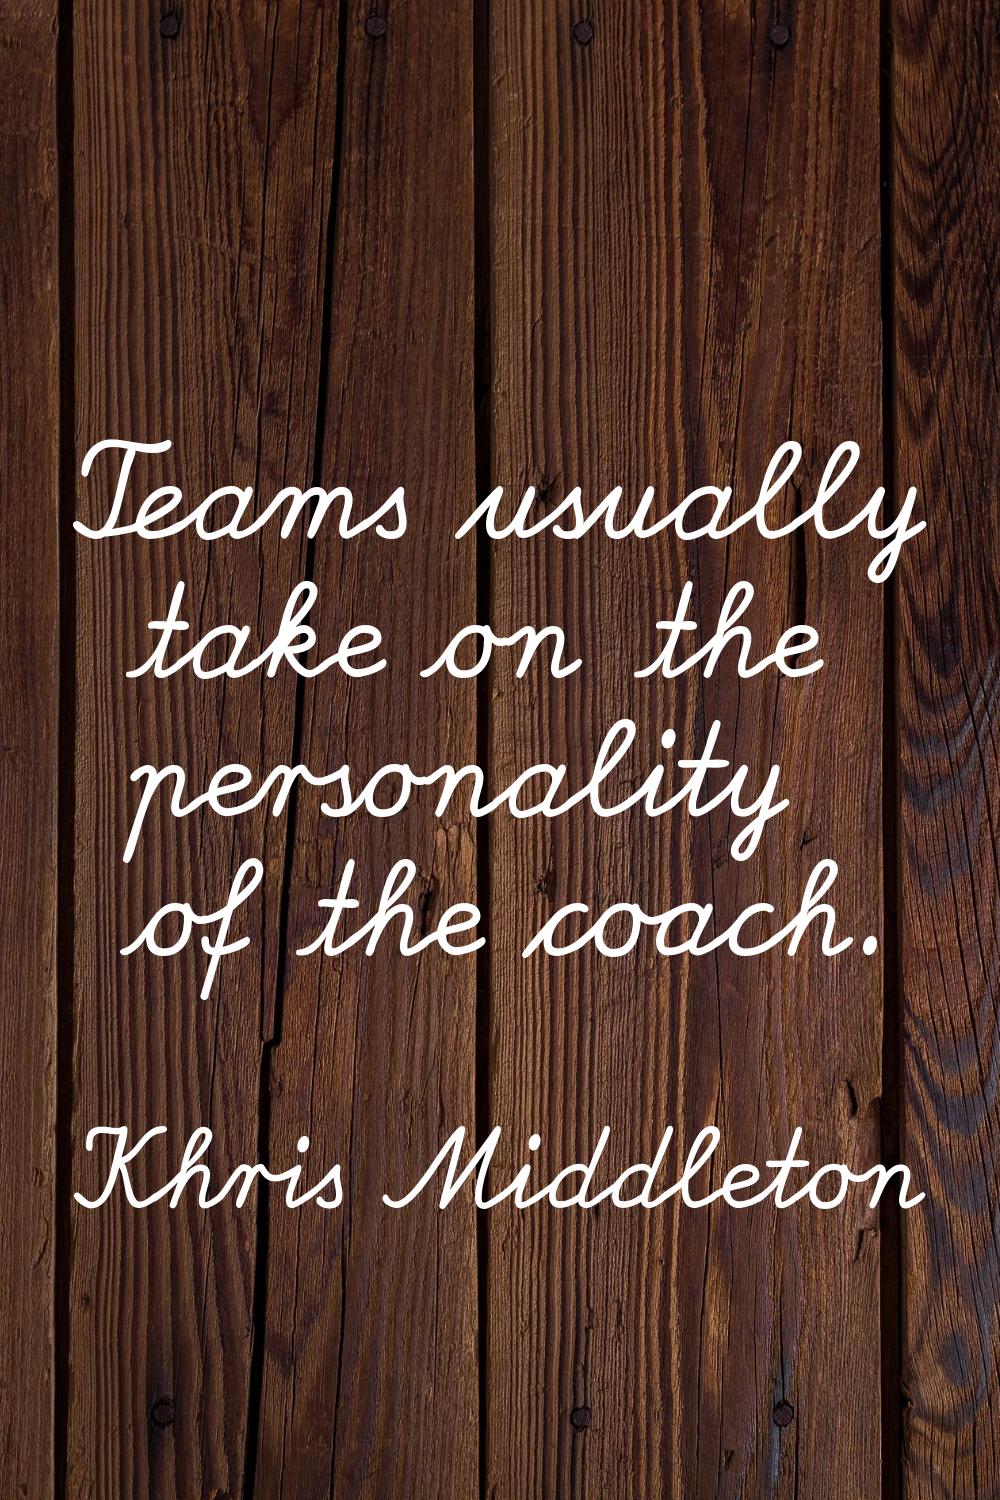 Teams usually take on the personality of the coach.